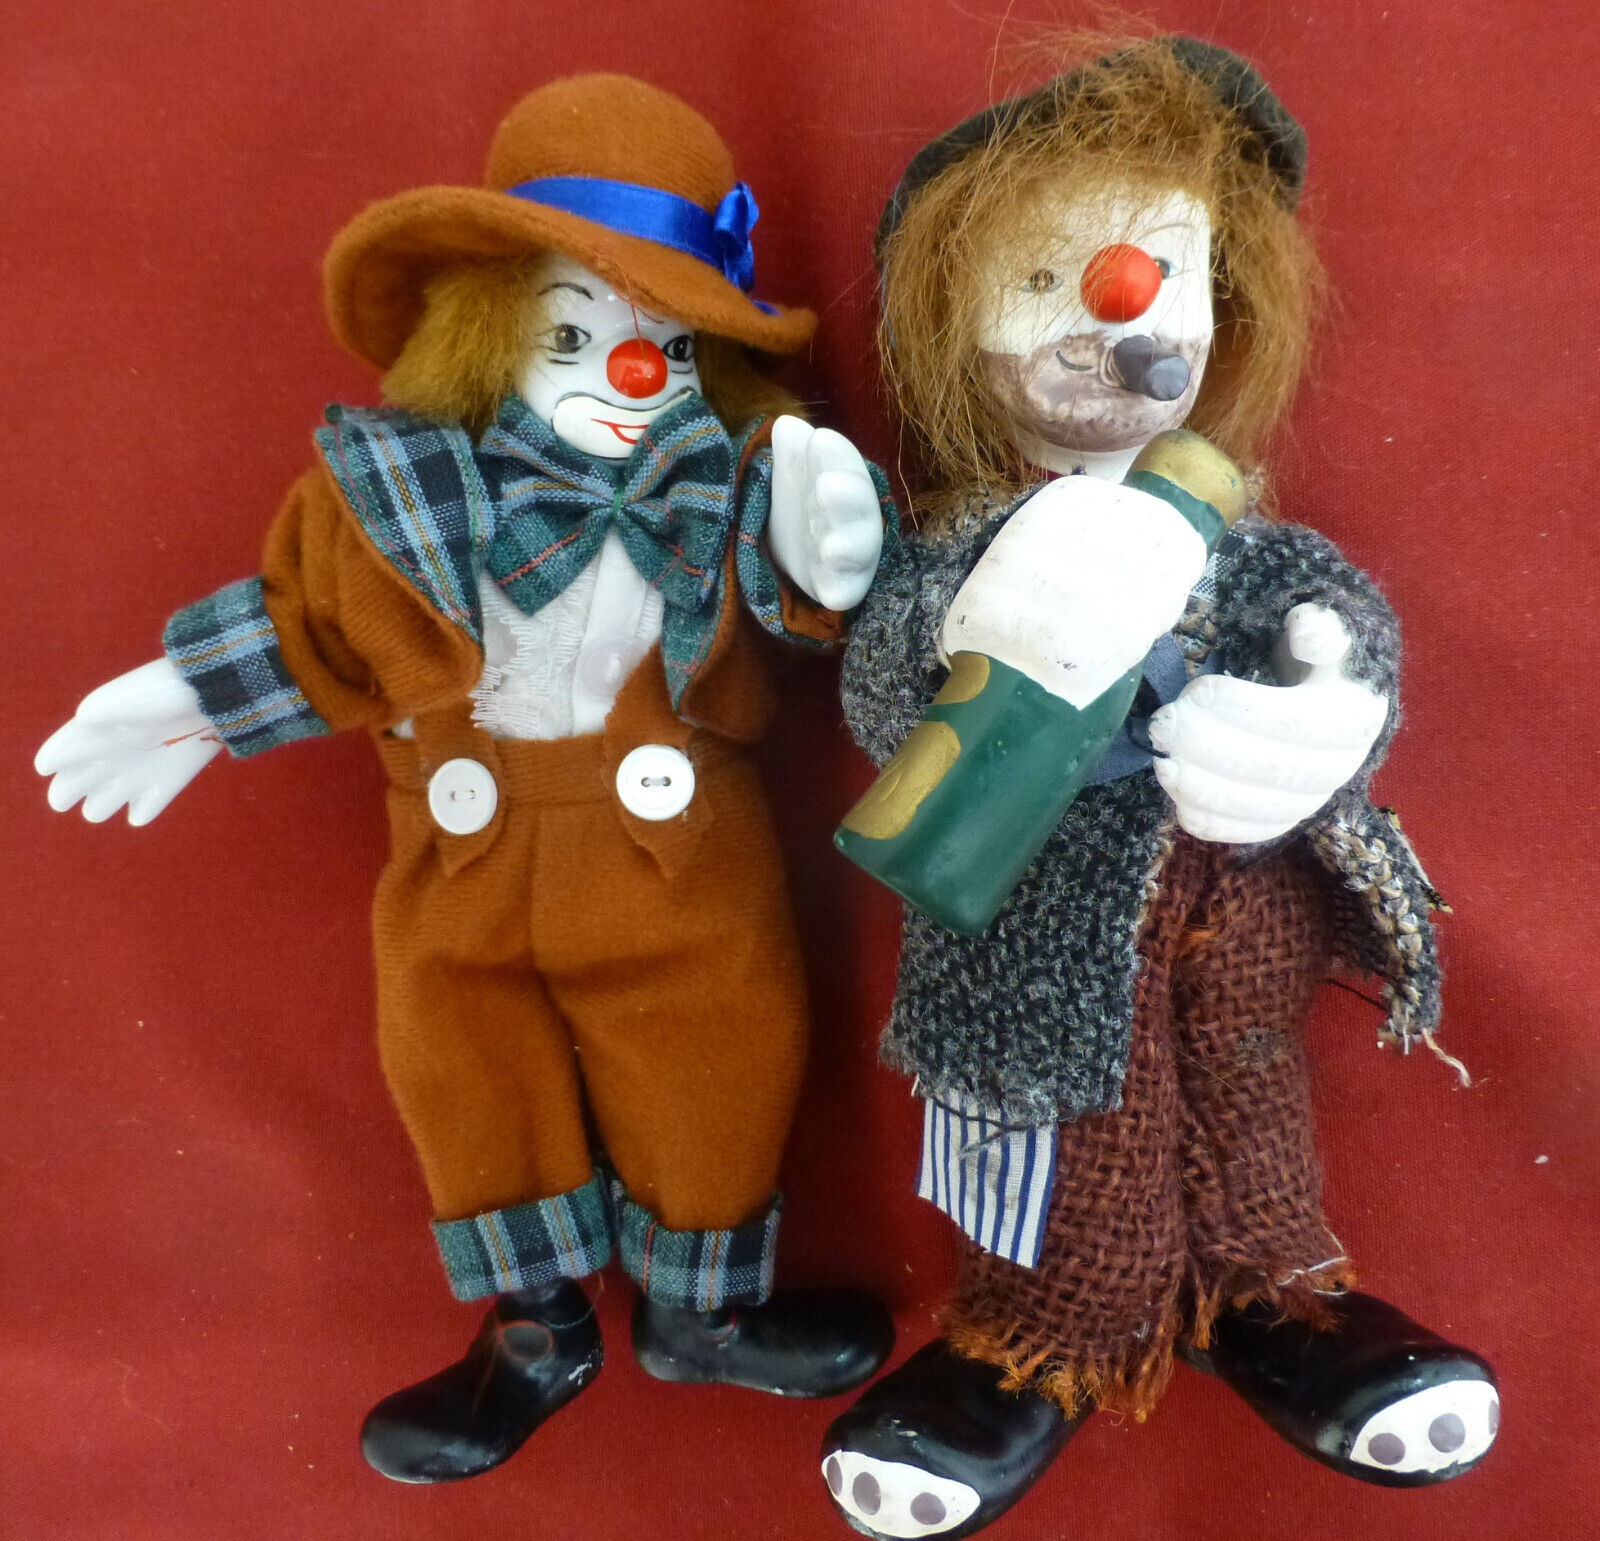 Clowns-Unmatched Pair of Figurines